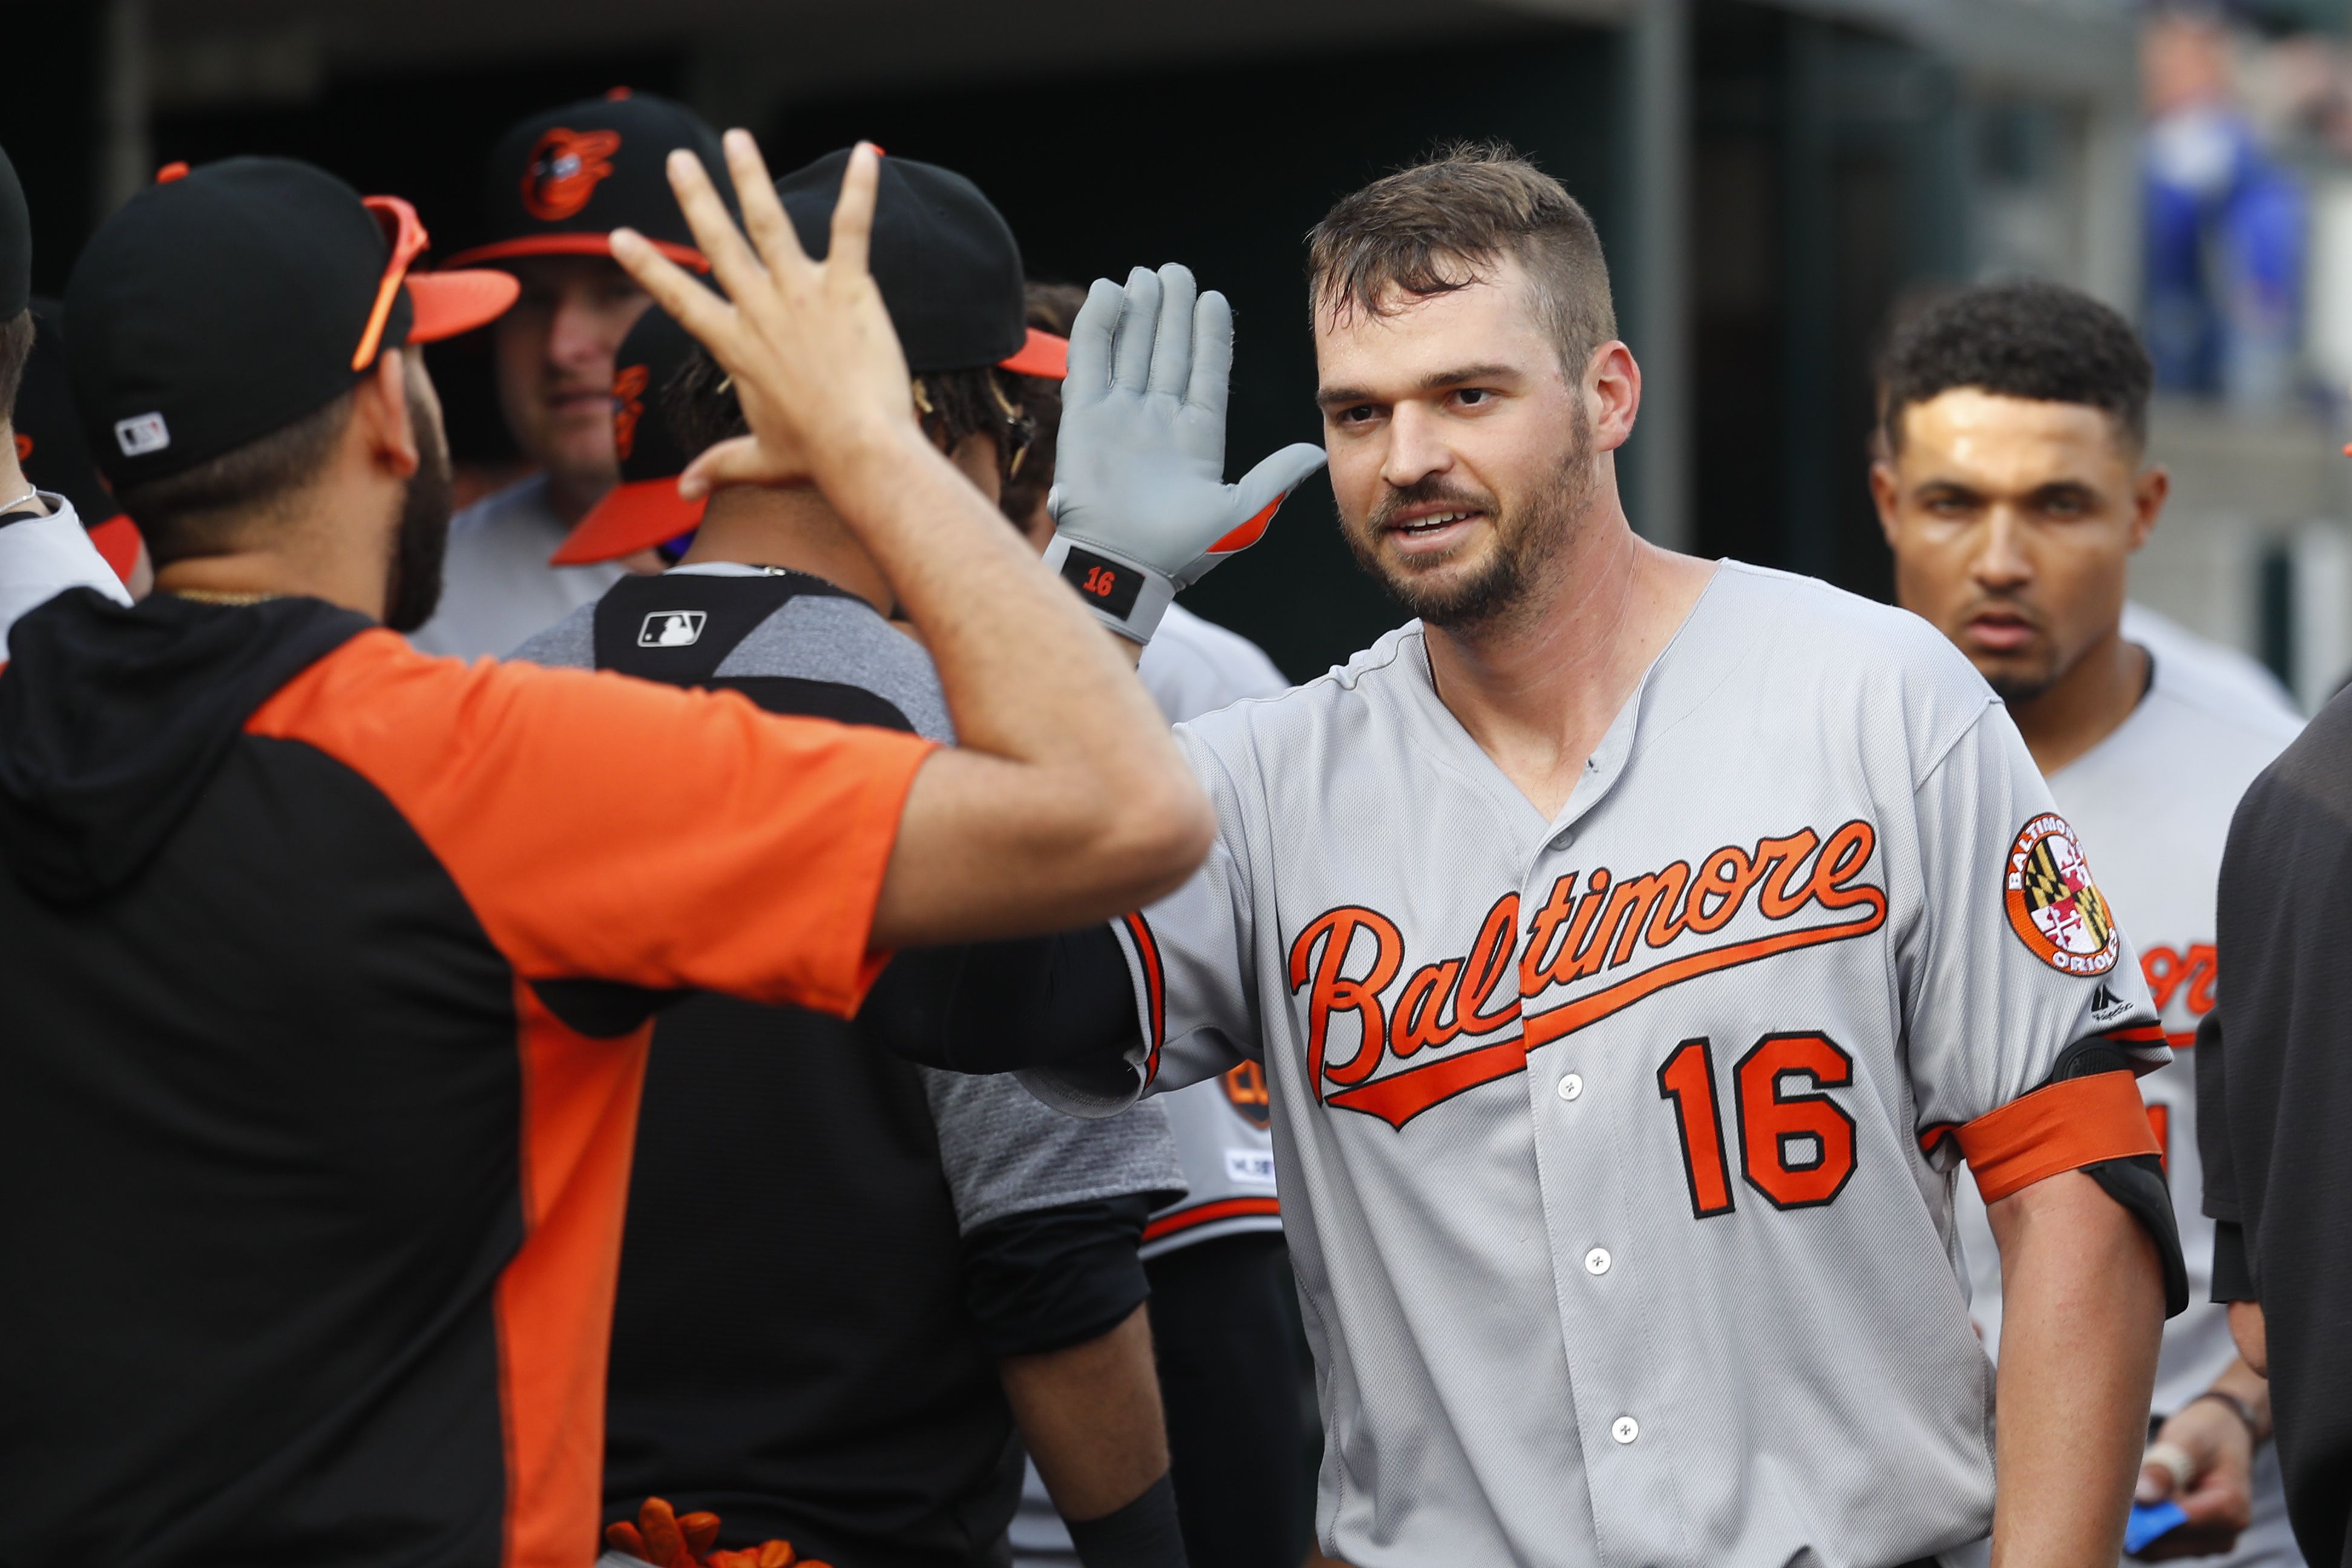 Orioles Surprise Trey Mancini on Zoom Call After Colon Cancer